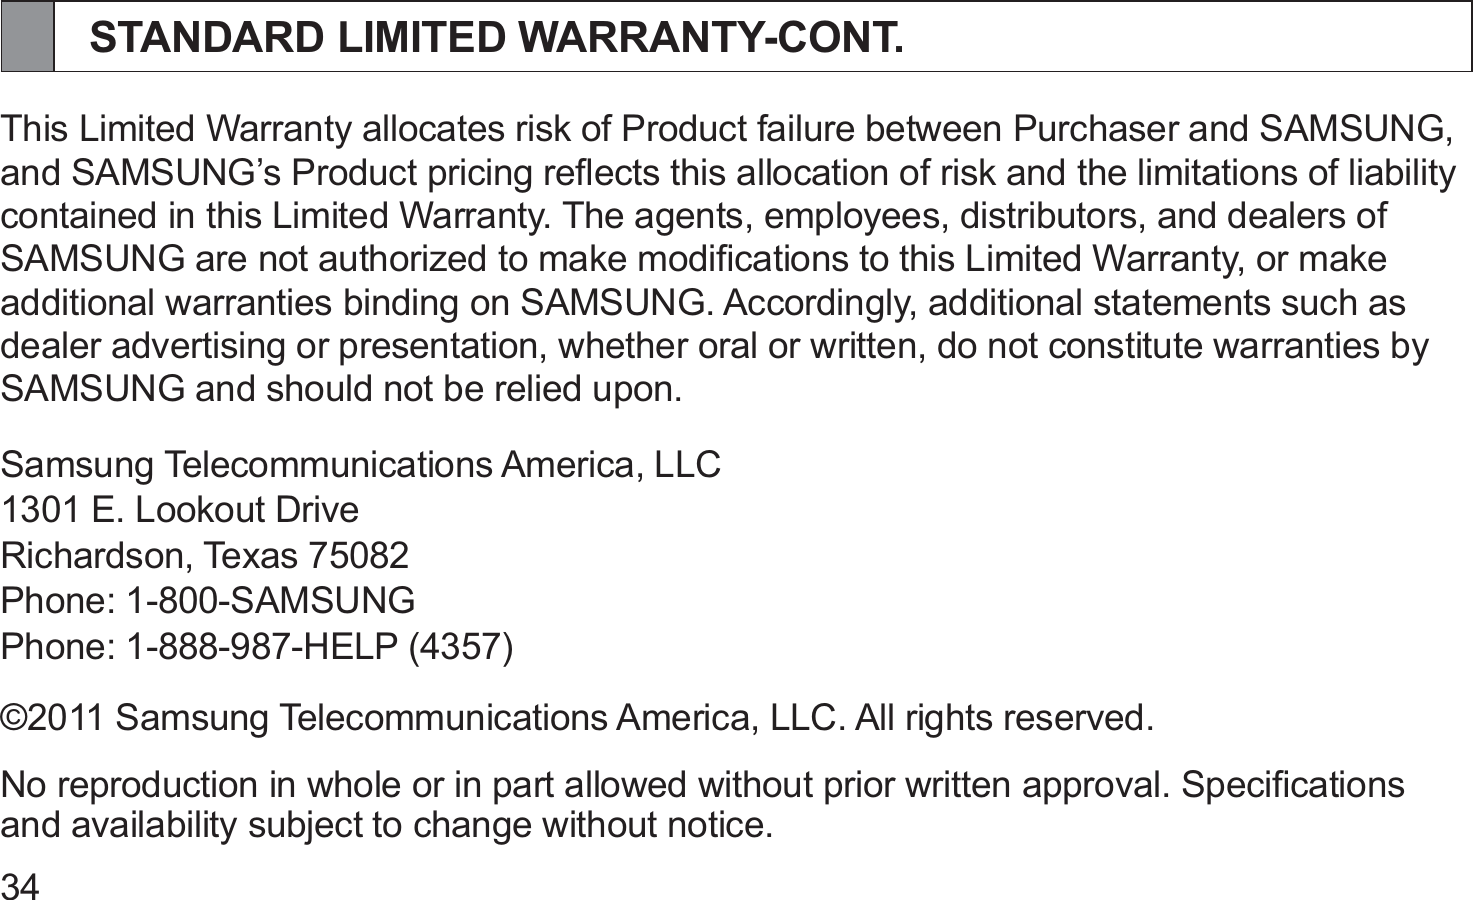 34STANDARD LIMITED WARRANTY-CONT.This Limited Warranty allocates risk of Product failure between Purchaser and SAMSUNG, and SAMSUNG’s Product pricing reﬂects this allocation of risk and the limitations of liability contained in this Limited Warranty. The agents, employees, distributors, and dealers of SAMSUNG are not authorized to make modiﬁcations to this Limited Warranty, or make additional warranties binding on SAMSUNG. Accordingly, additional statements such as dealer advertising or presentation, whether oral or written, do not constitute warranties by SAMSUNG and should not be relied upon.Samsung Telecommunications America, LLC1301 E. Lookout DriveRichardson, Texas 75082Phone: 1-800-SAMSUNGPhone: 1-888-987-HELP (4357)©2011 Samsung Telecommunications America, LLC. All rights reserved.No reproduction in whole or in part allowed without prior written approval. Speciﬁcations and availability subject to change without notice.